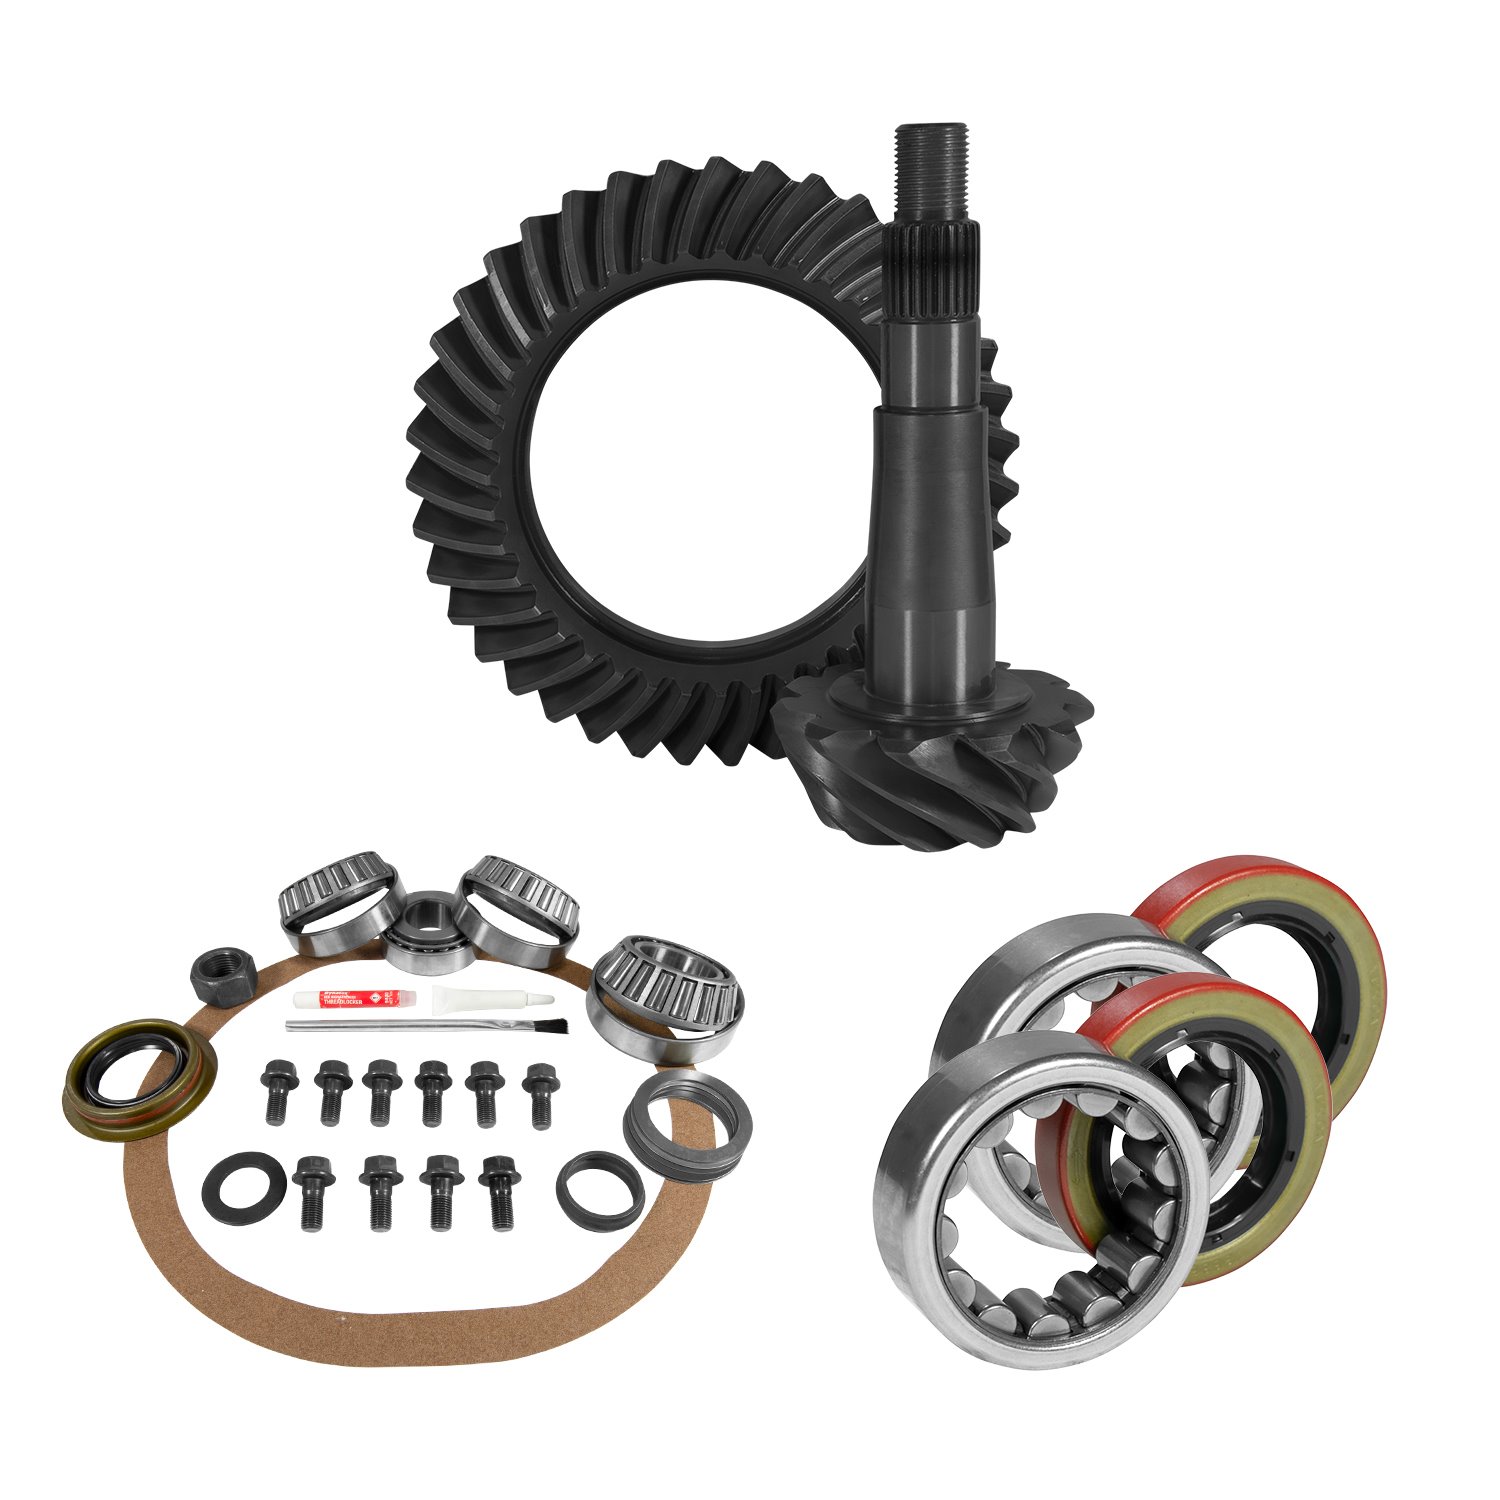 USA Standard 10904 8.25 in. Chy 4.88 Rear Ring & Pinion Install Kit, 1.618 in. Id Axle Bearings & Seals